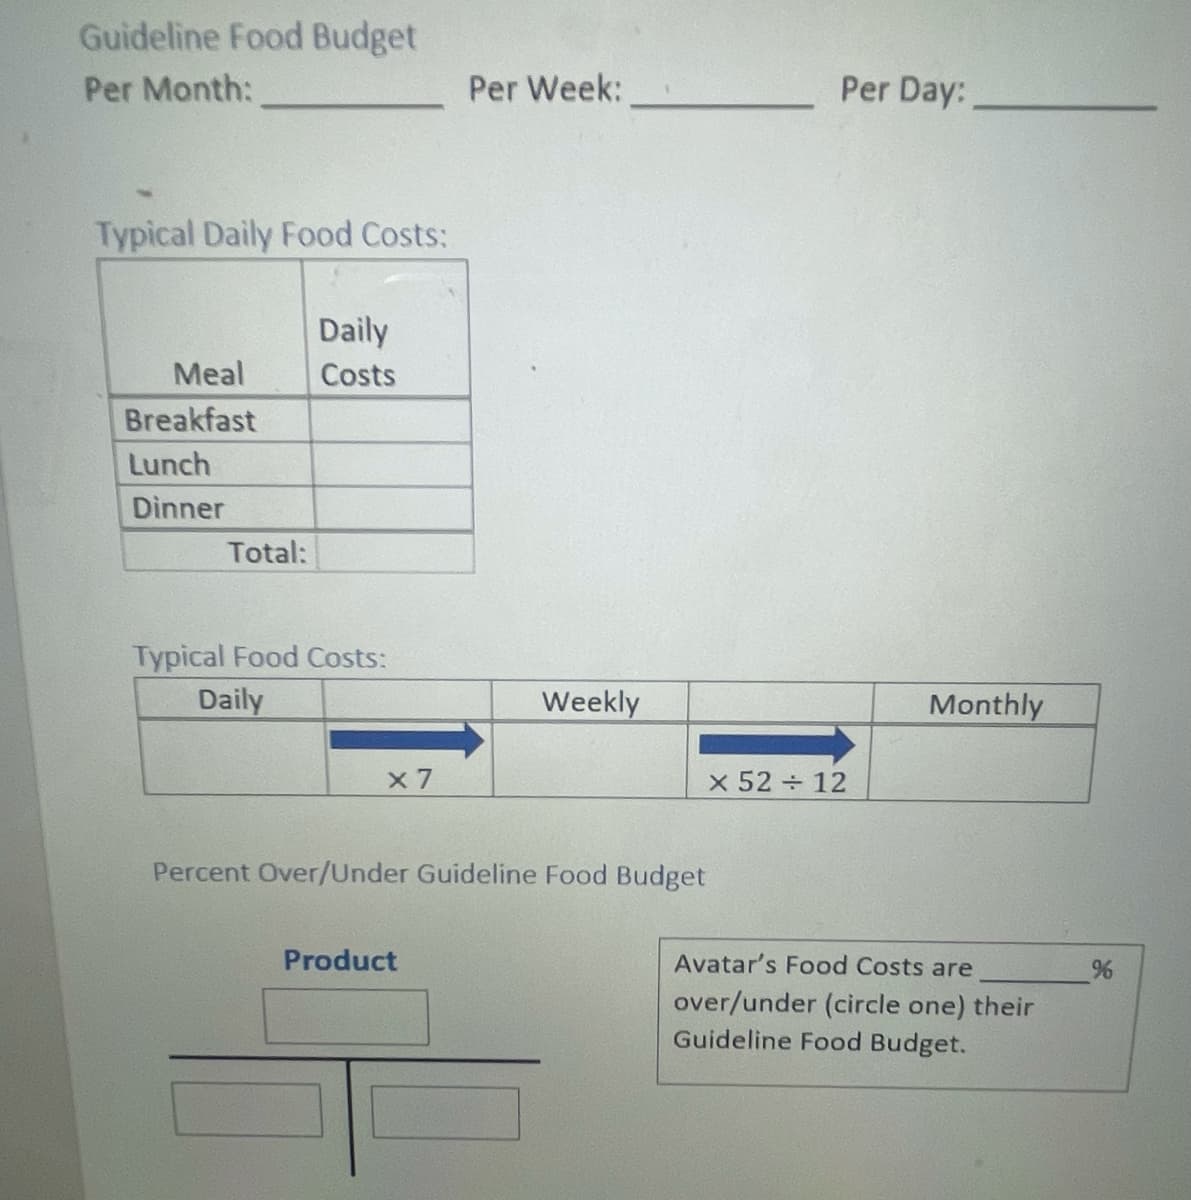 Guideline Food Budget
Per Month:
Per Week:
Per Day:
Typical Daily Food Costs:
Daily
Meal
Costs
Breakfast
Lunch
Dinner
Total:
Typical Food Costs:
Daily
Weekly
Monthly
x 7
x 52 12
Percent Over/Under Guideline Food Budget
Product
Avatar's Food Costs are
over/under (circle one) their
Guideline Food Budget.
